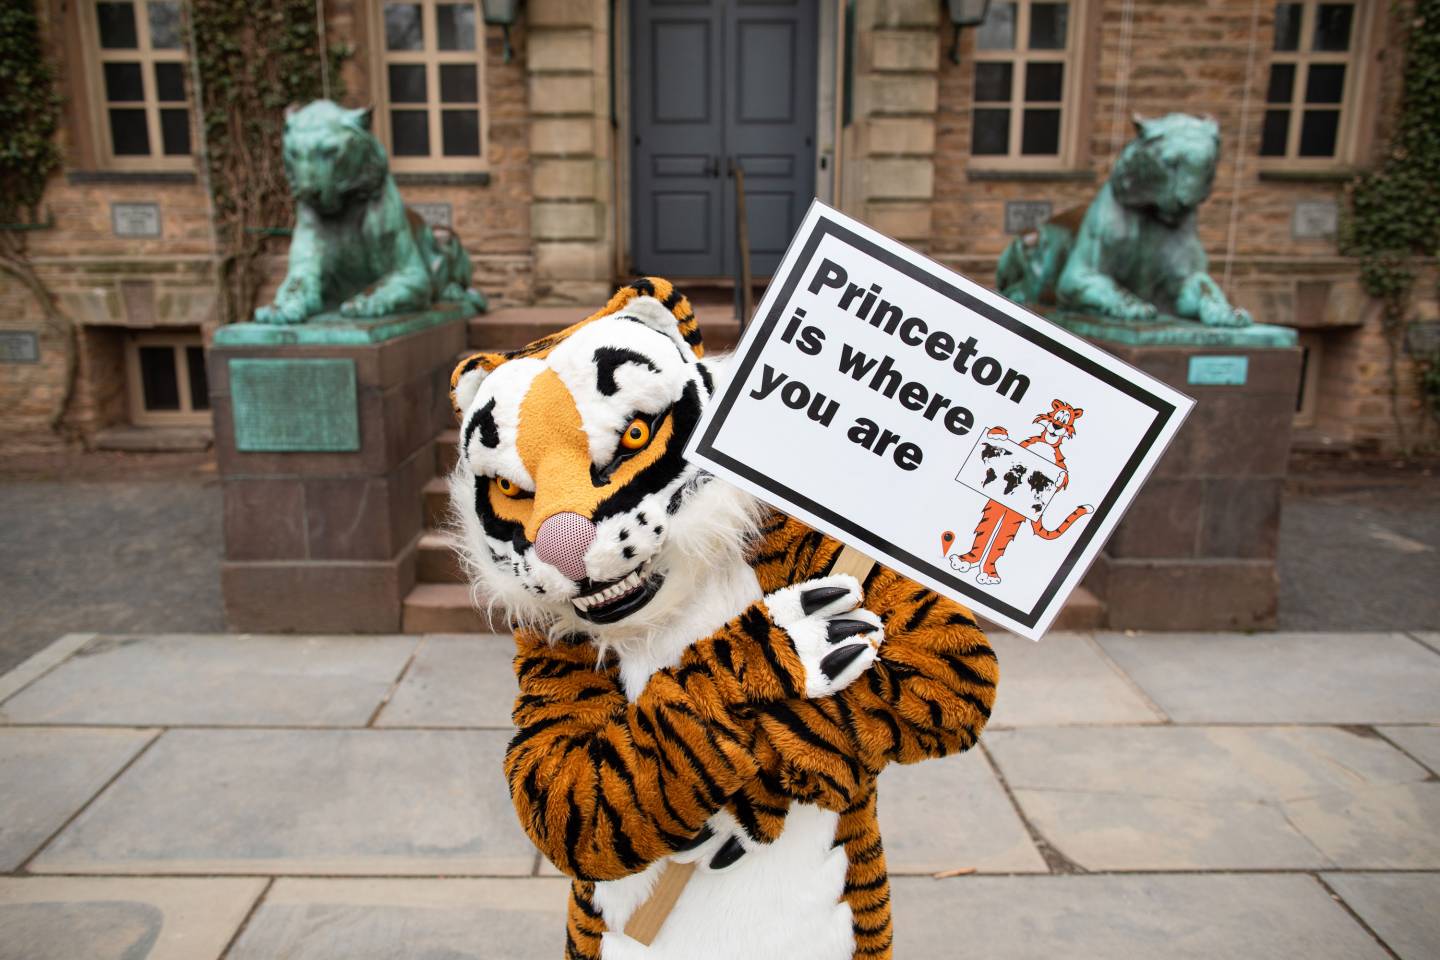 Reunions Online: Princeton is where you are